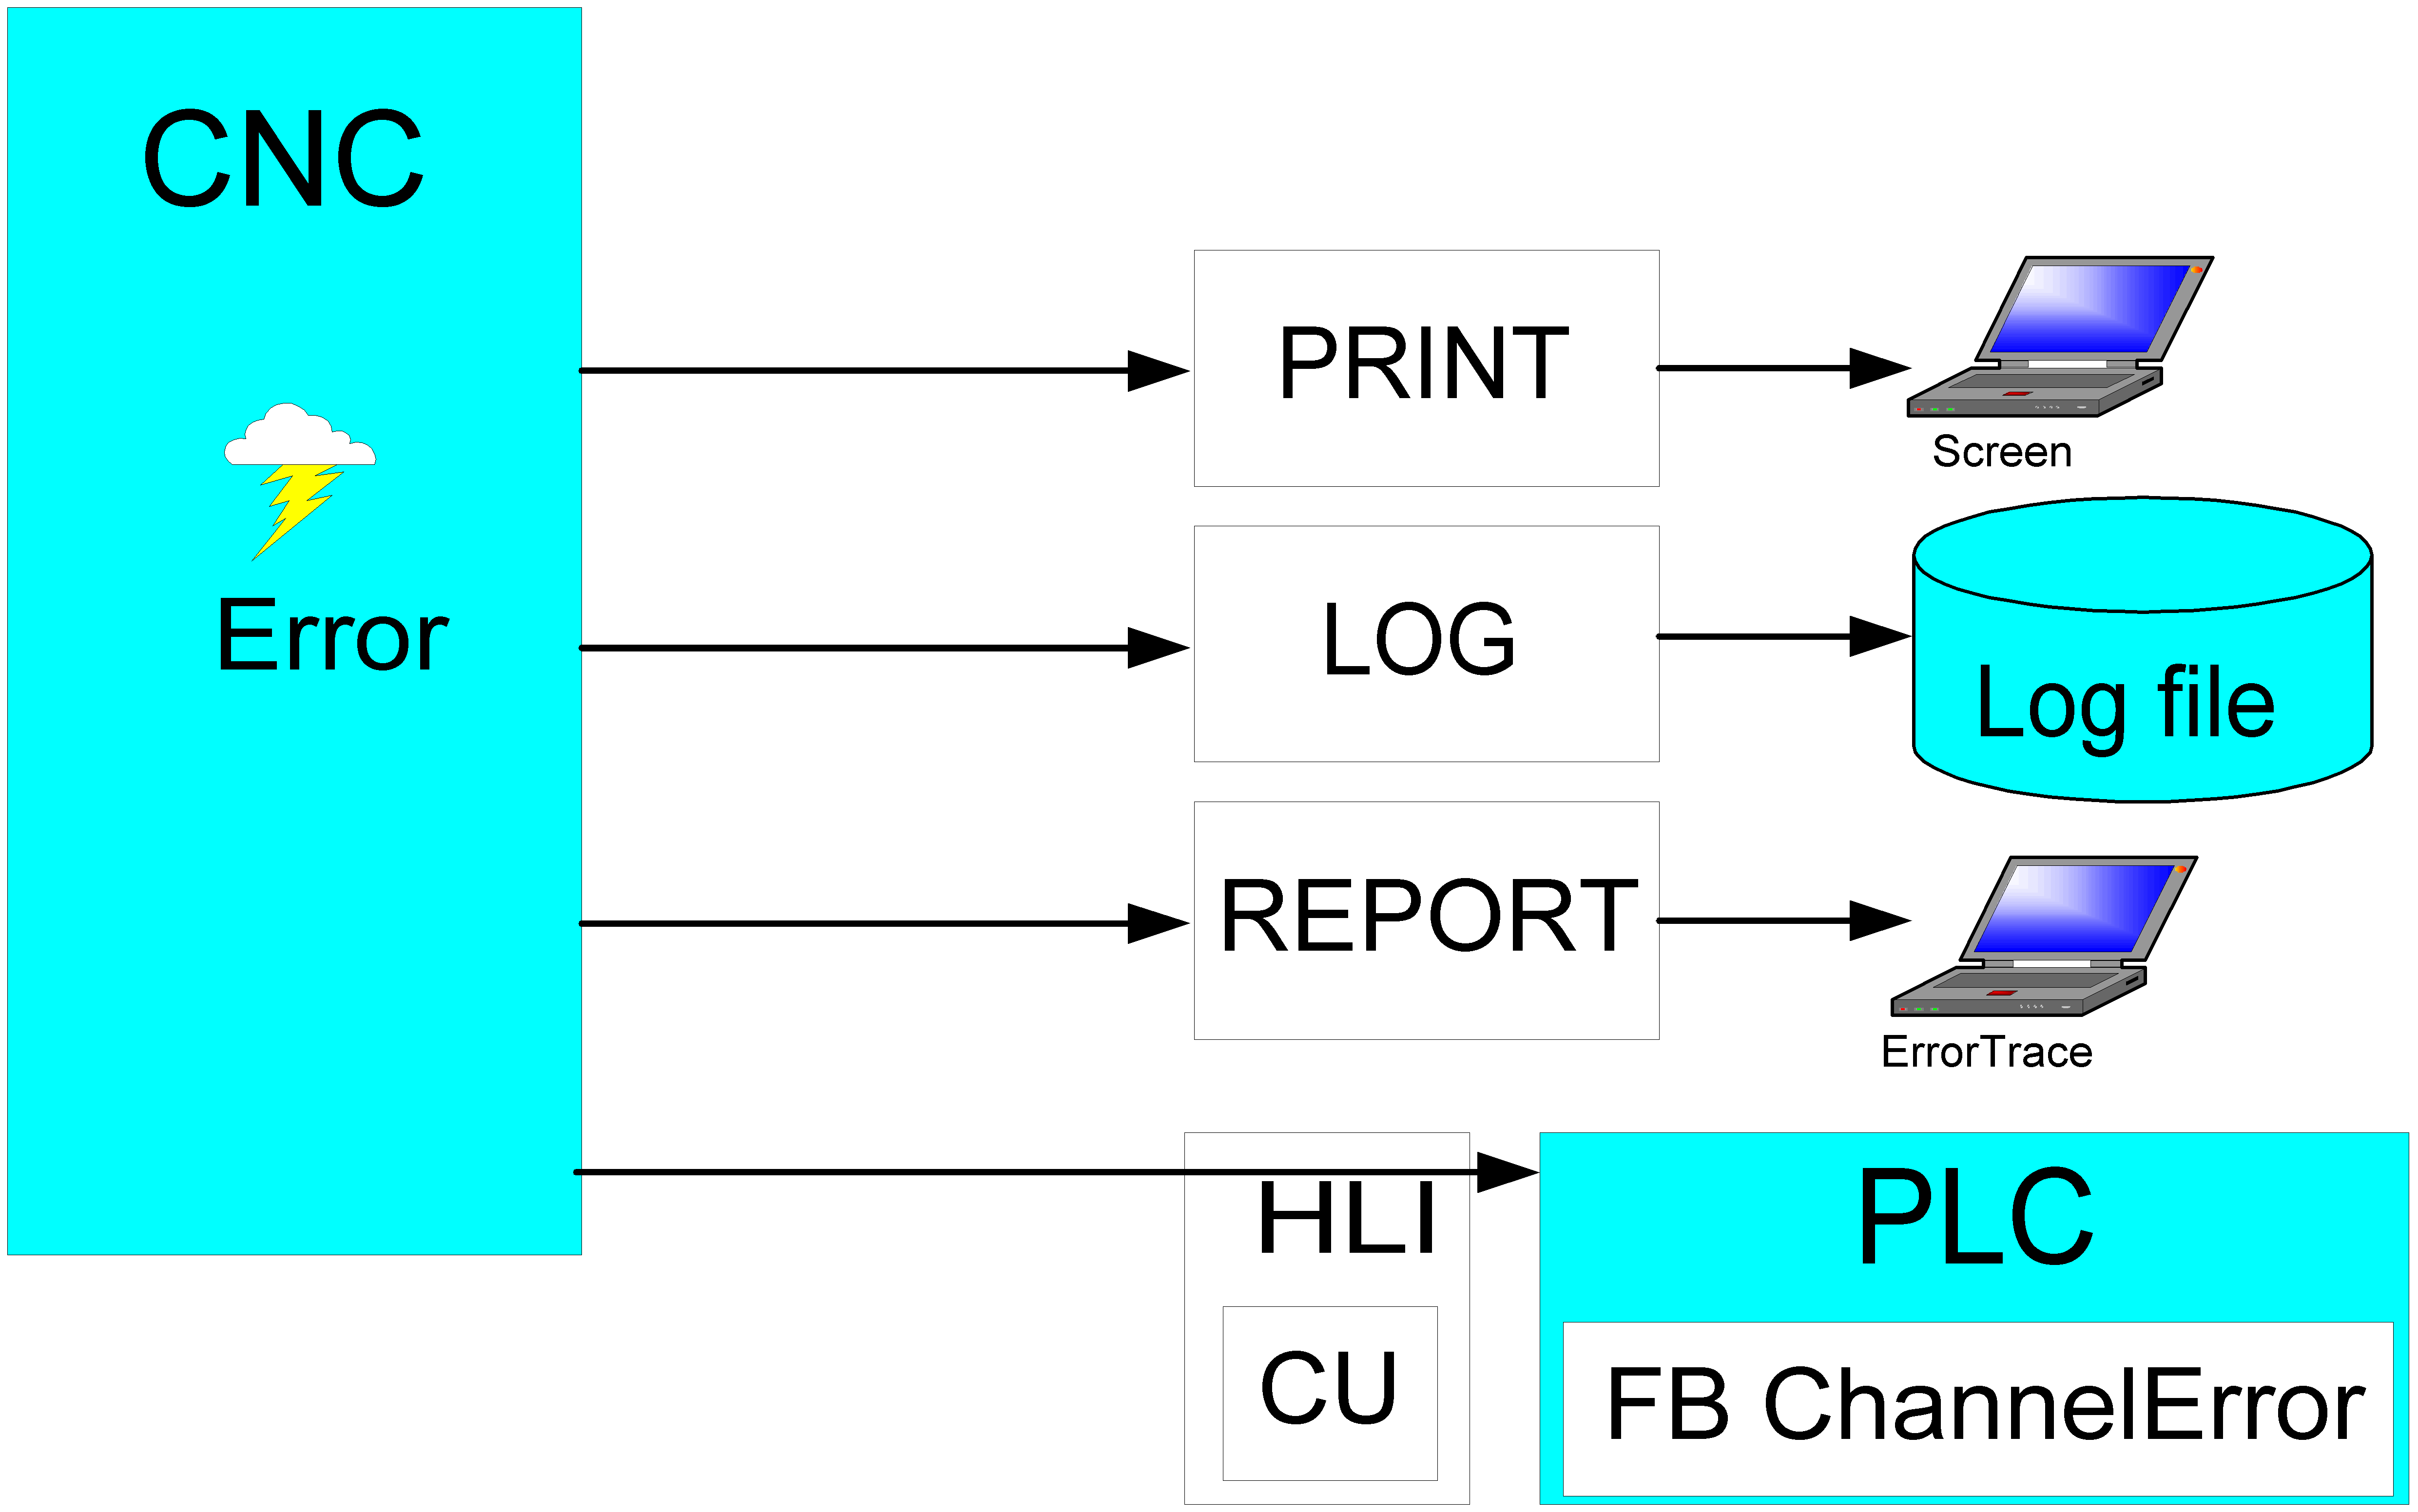 Overview of output options with the PLC block interface